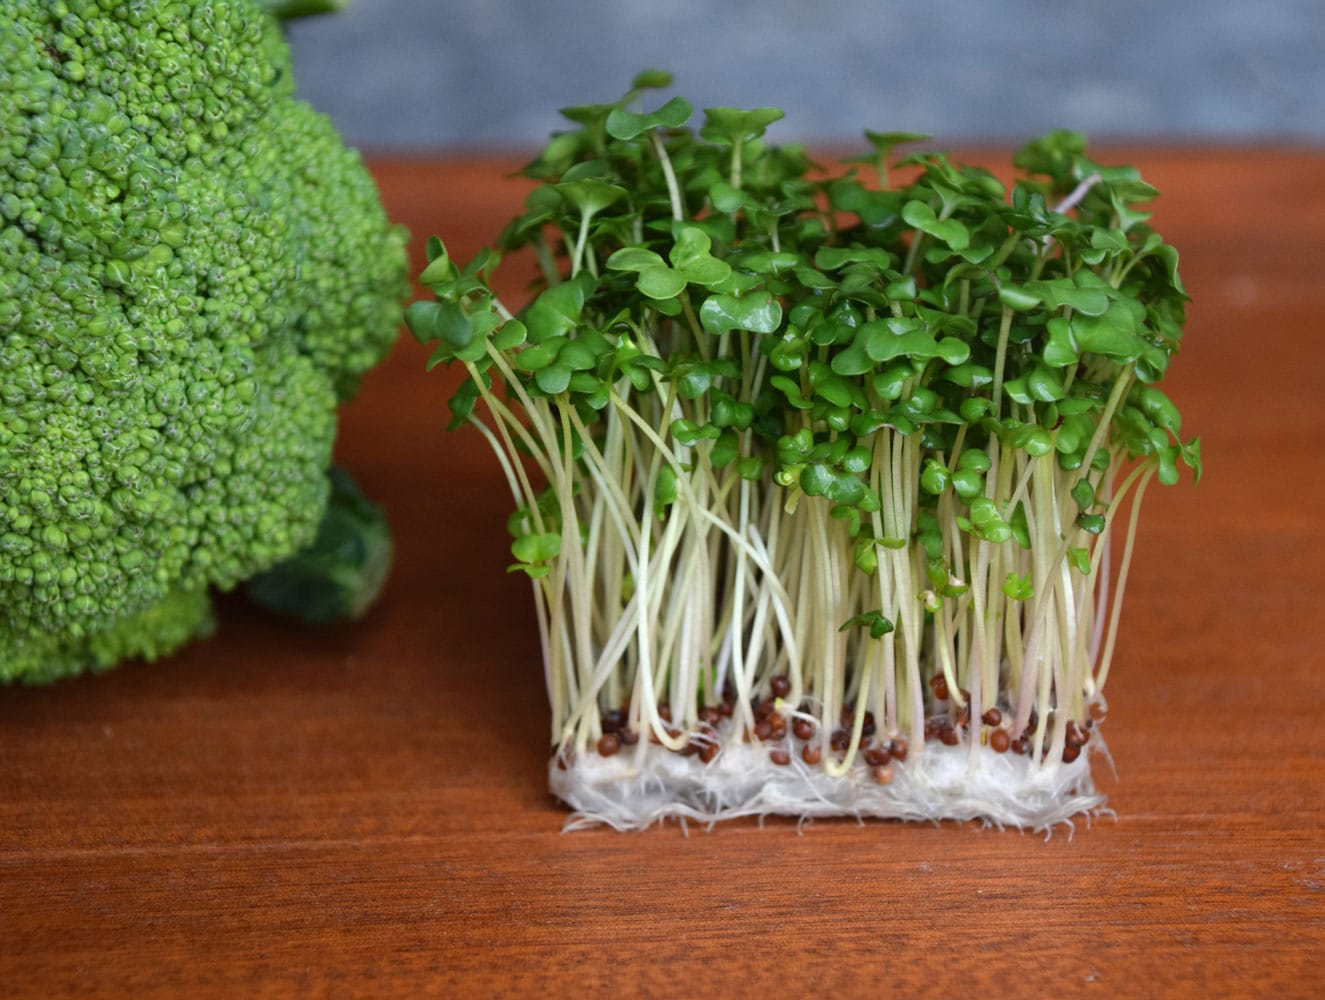 Broccoli sprouts have been discovered to contain seven times more polysulfides than mature broccoli